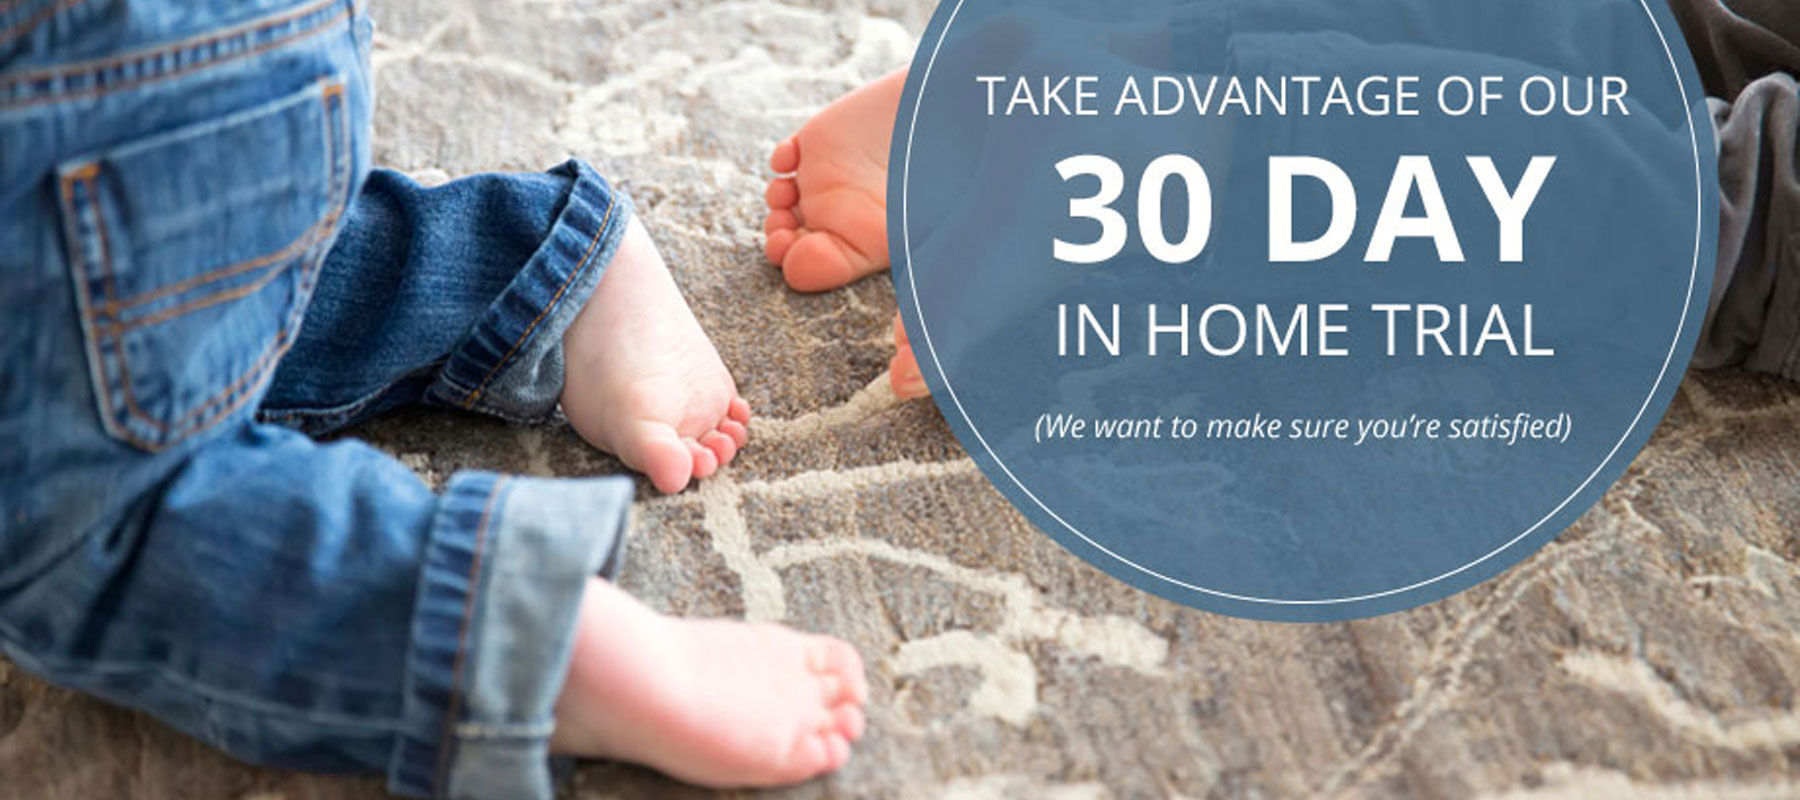 Take Advantage of Our 30 Day In Home Trial. (We want to make sure you're satisfied)